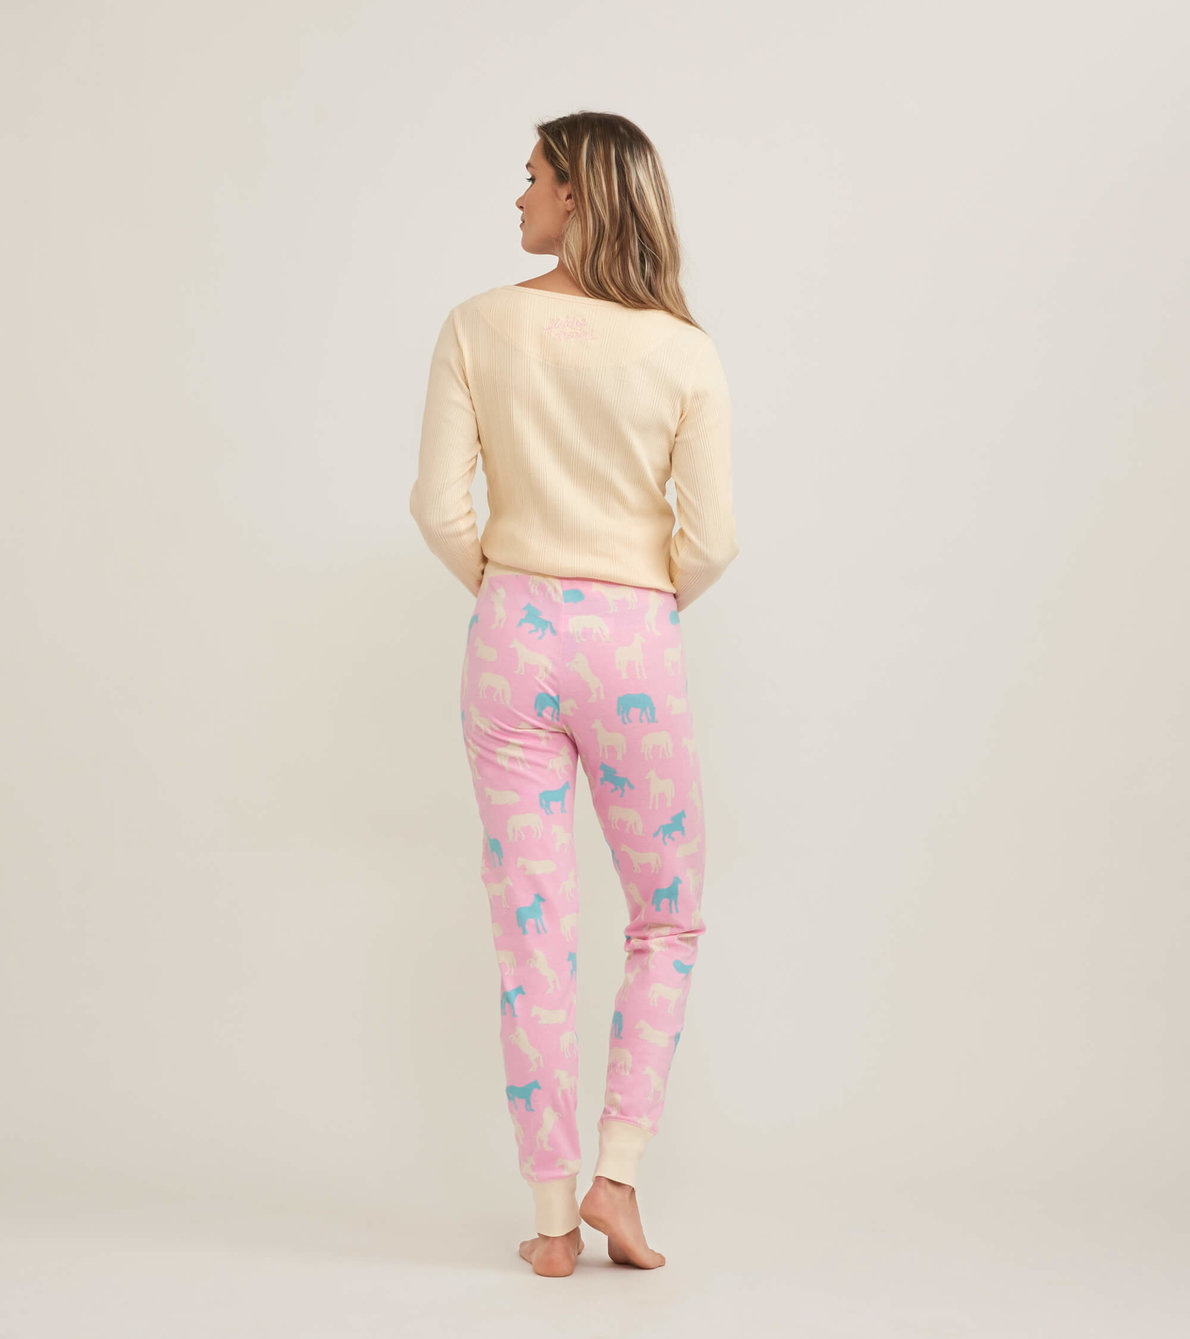 View larger image of Horse Silhouettes Women's Sleep Leggings